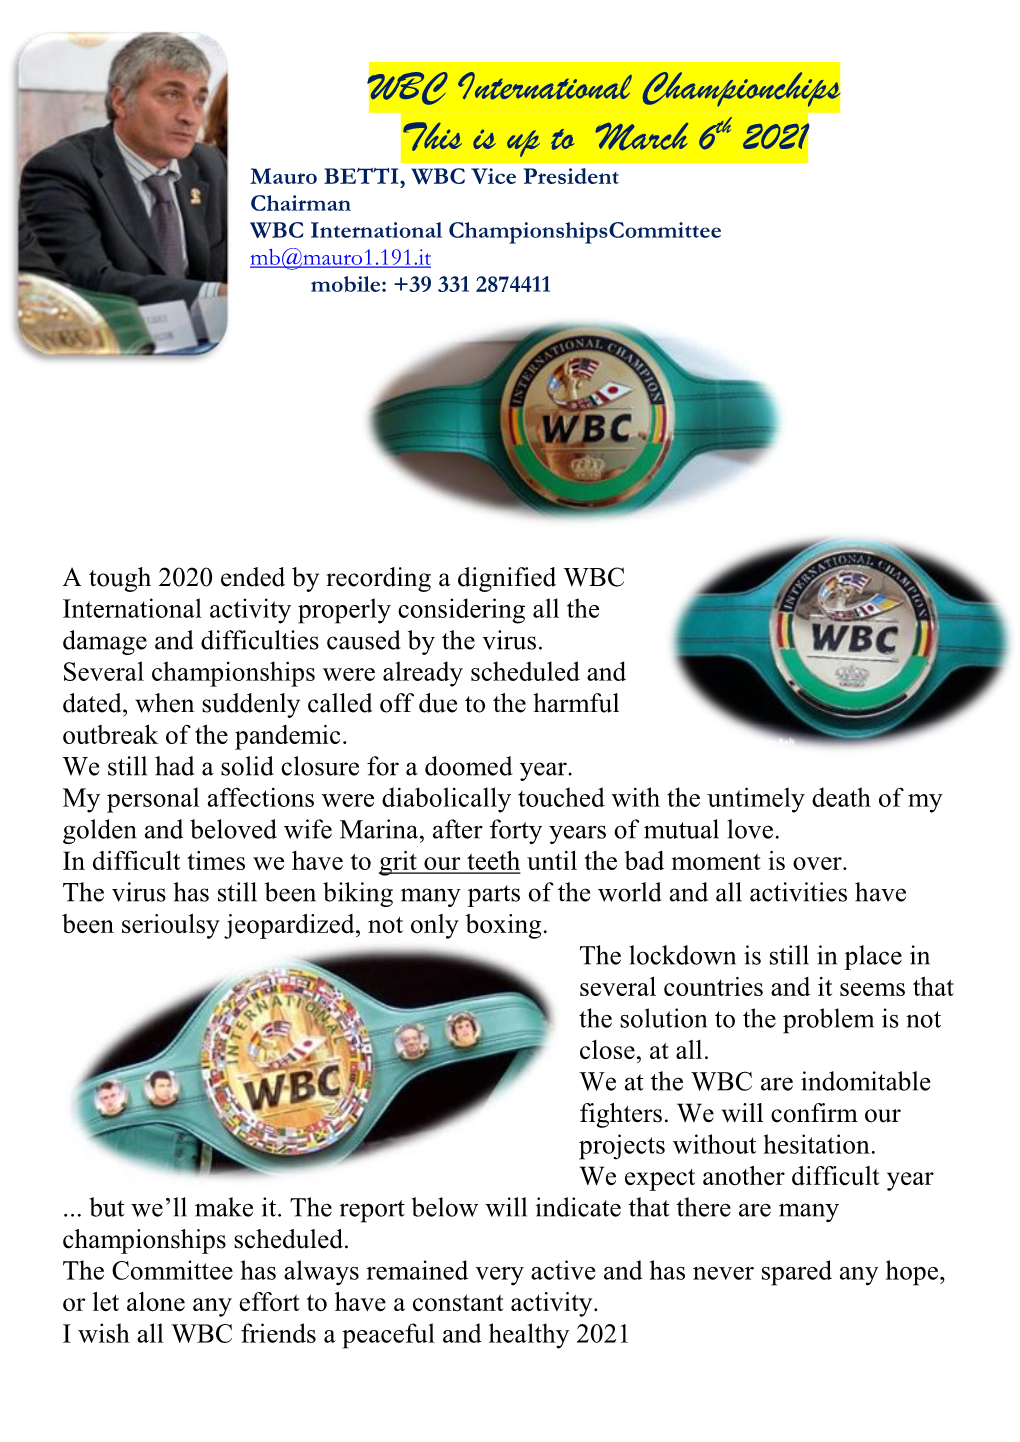 WBC International Championchips This Is up to March 6Th 2021